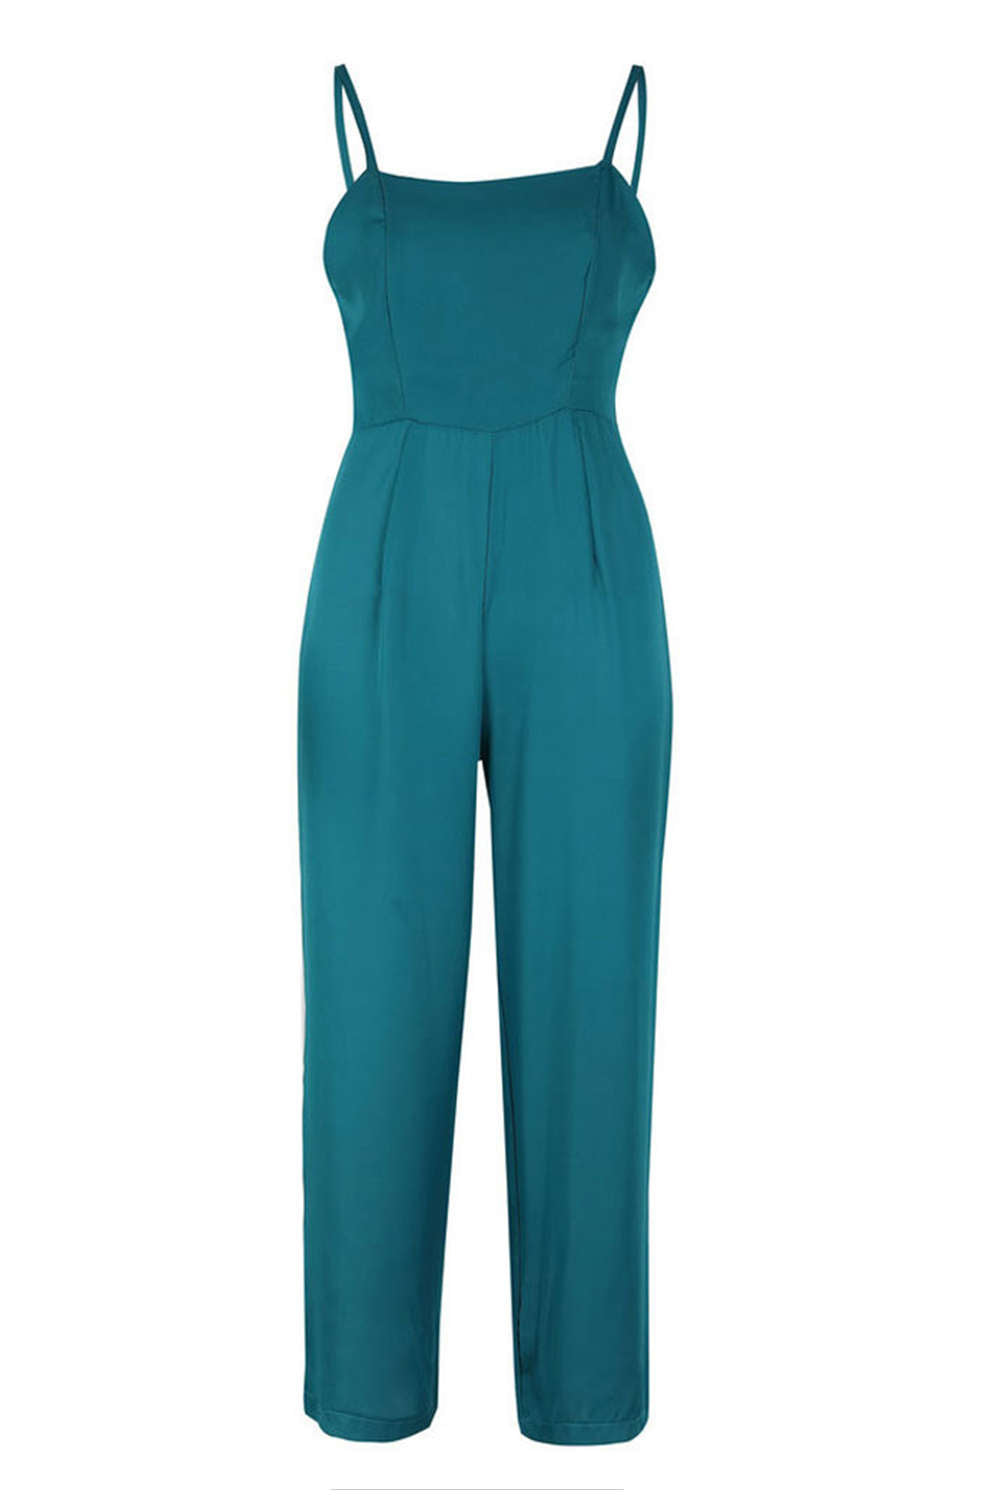 Iyasson Solid Sleeveless Backless Wide Leg Sexy Jumpsuits